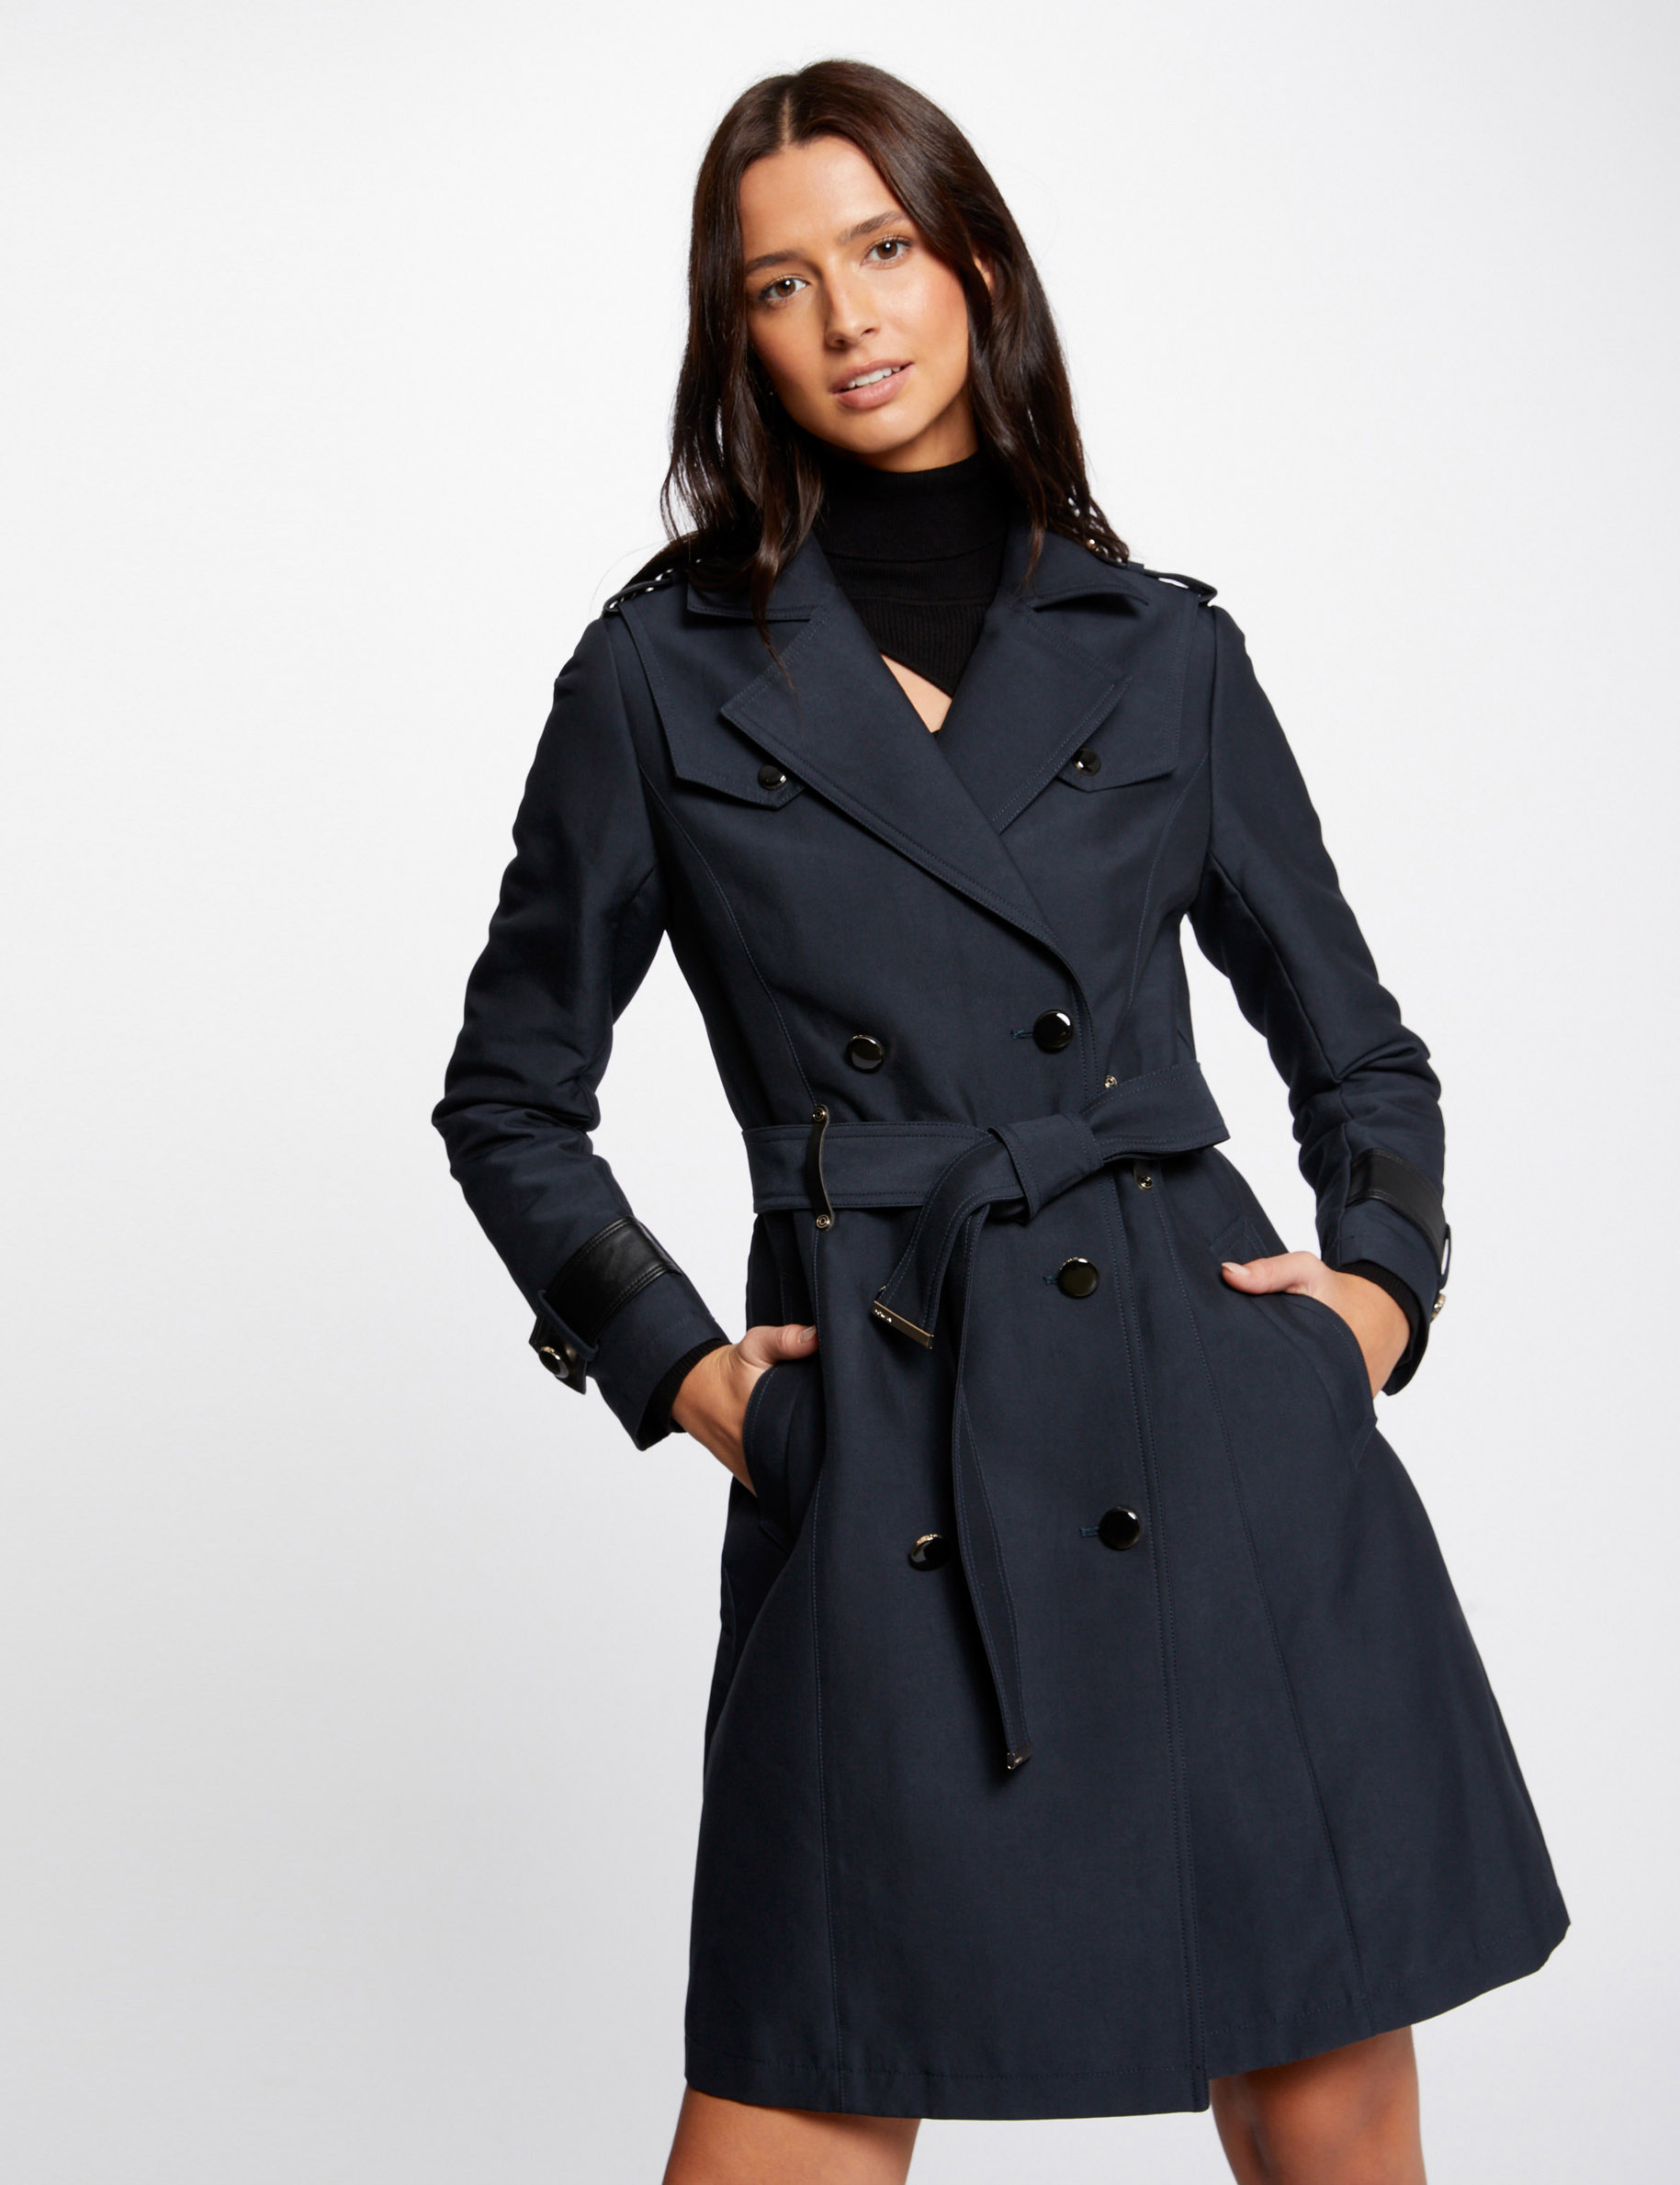 Belted trenchcoat faux leather details navy ladies' | Morgan